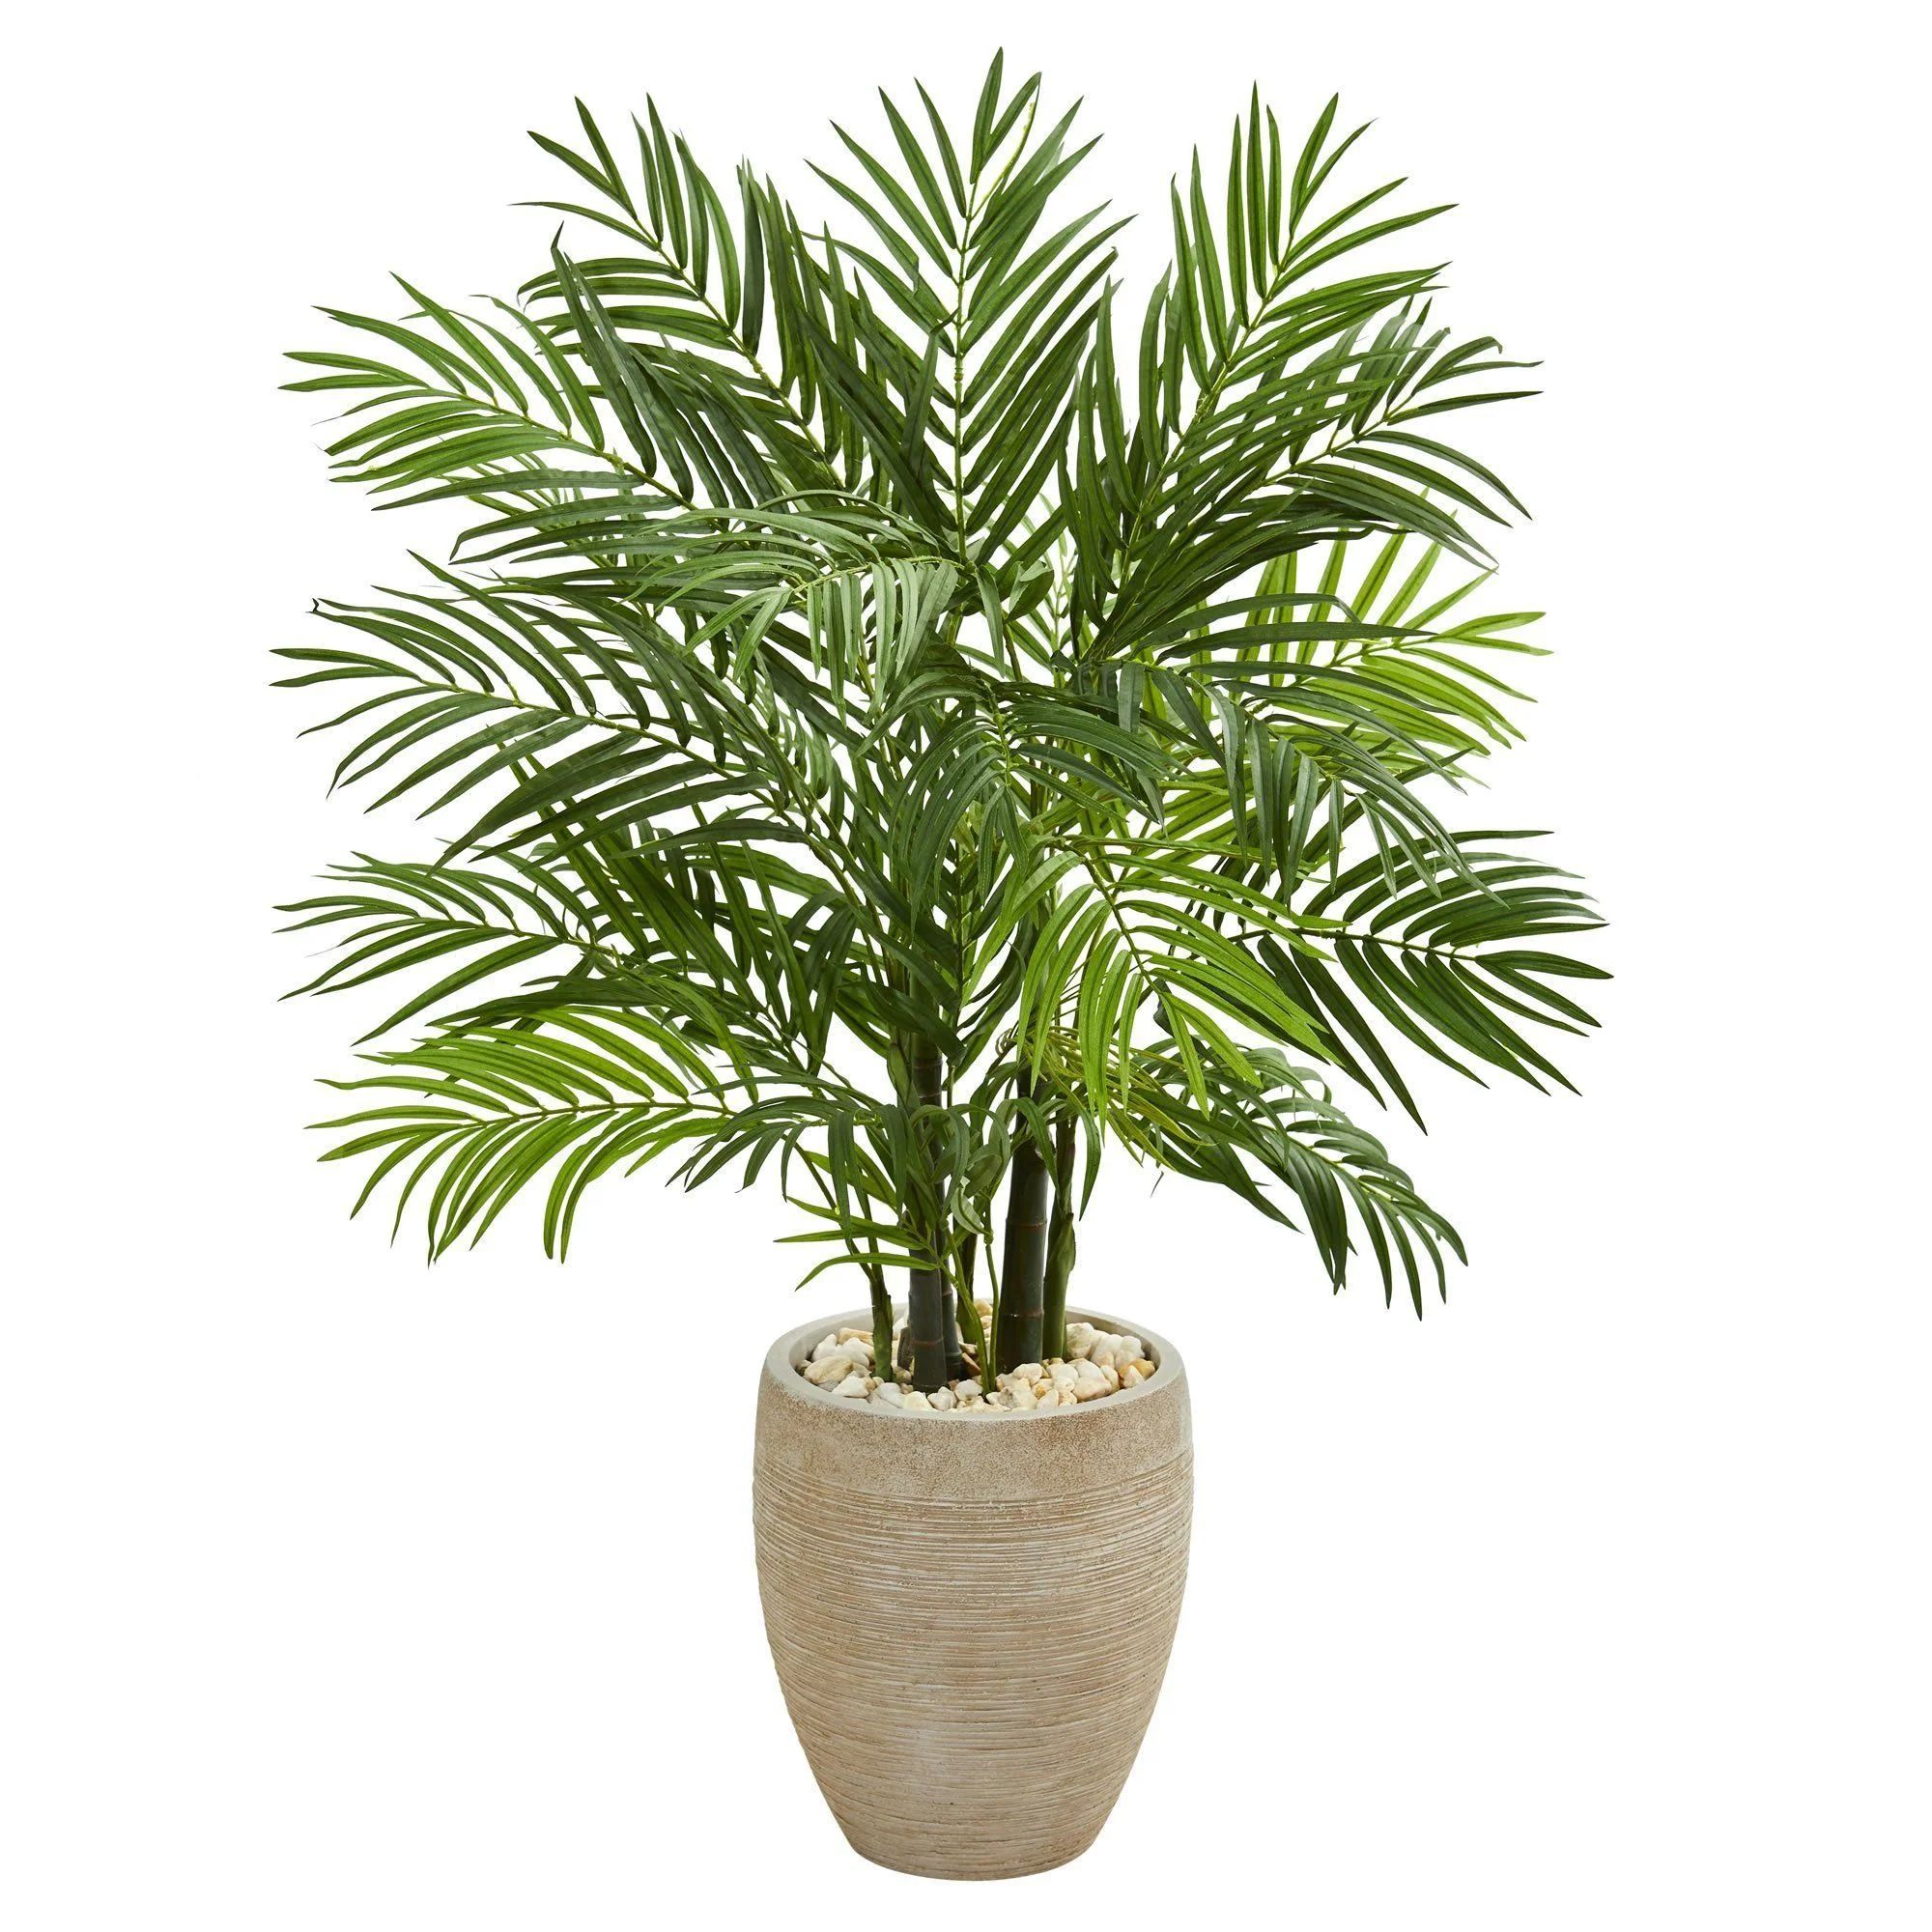 4’ Areca Palm Artificial Tree in Sand Colored Planter | Nearly Natural